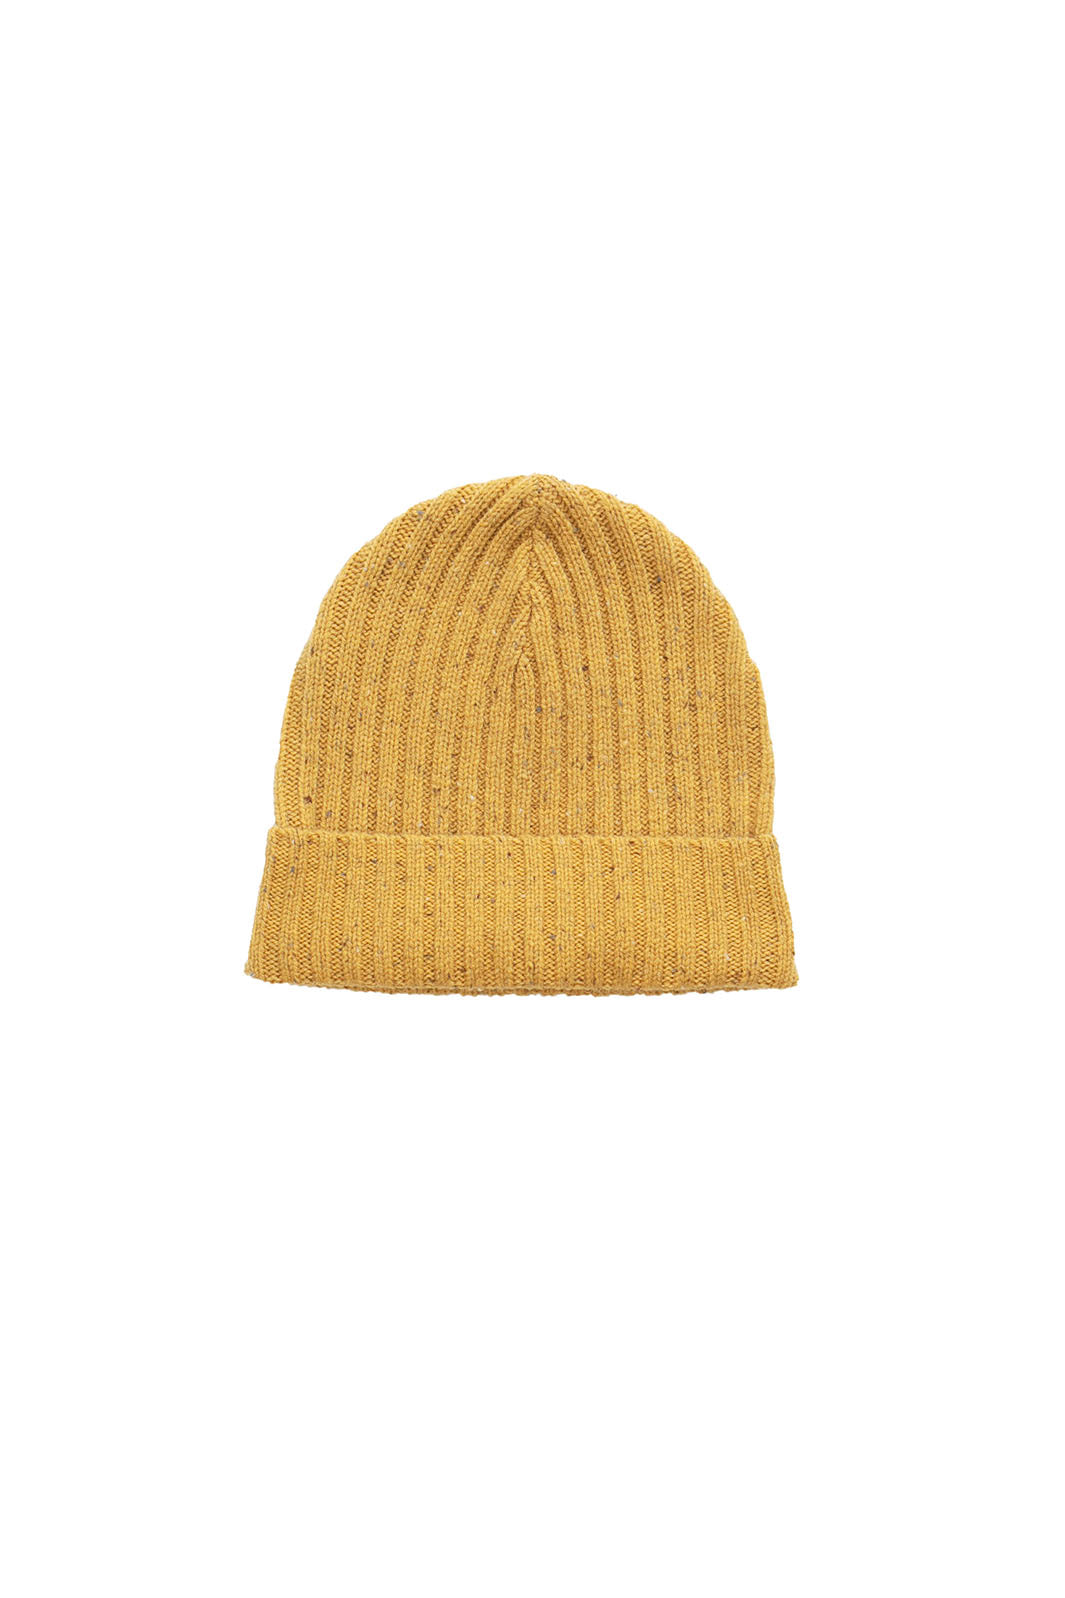 Golden yellow ribbed knit beanie